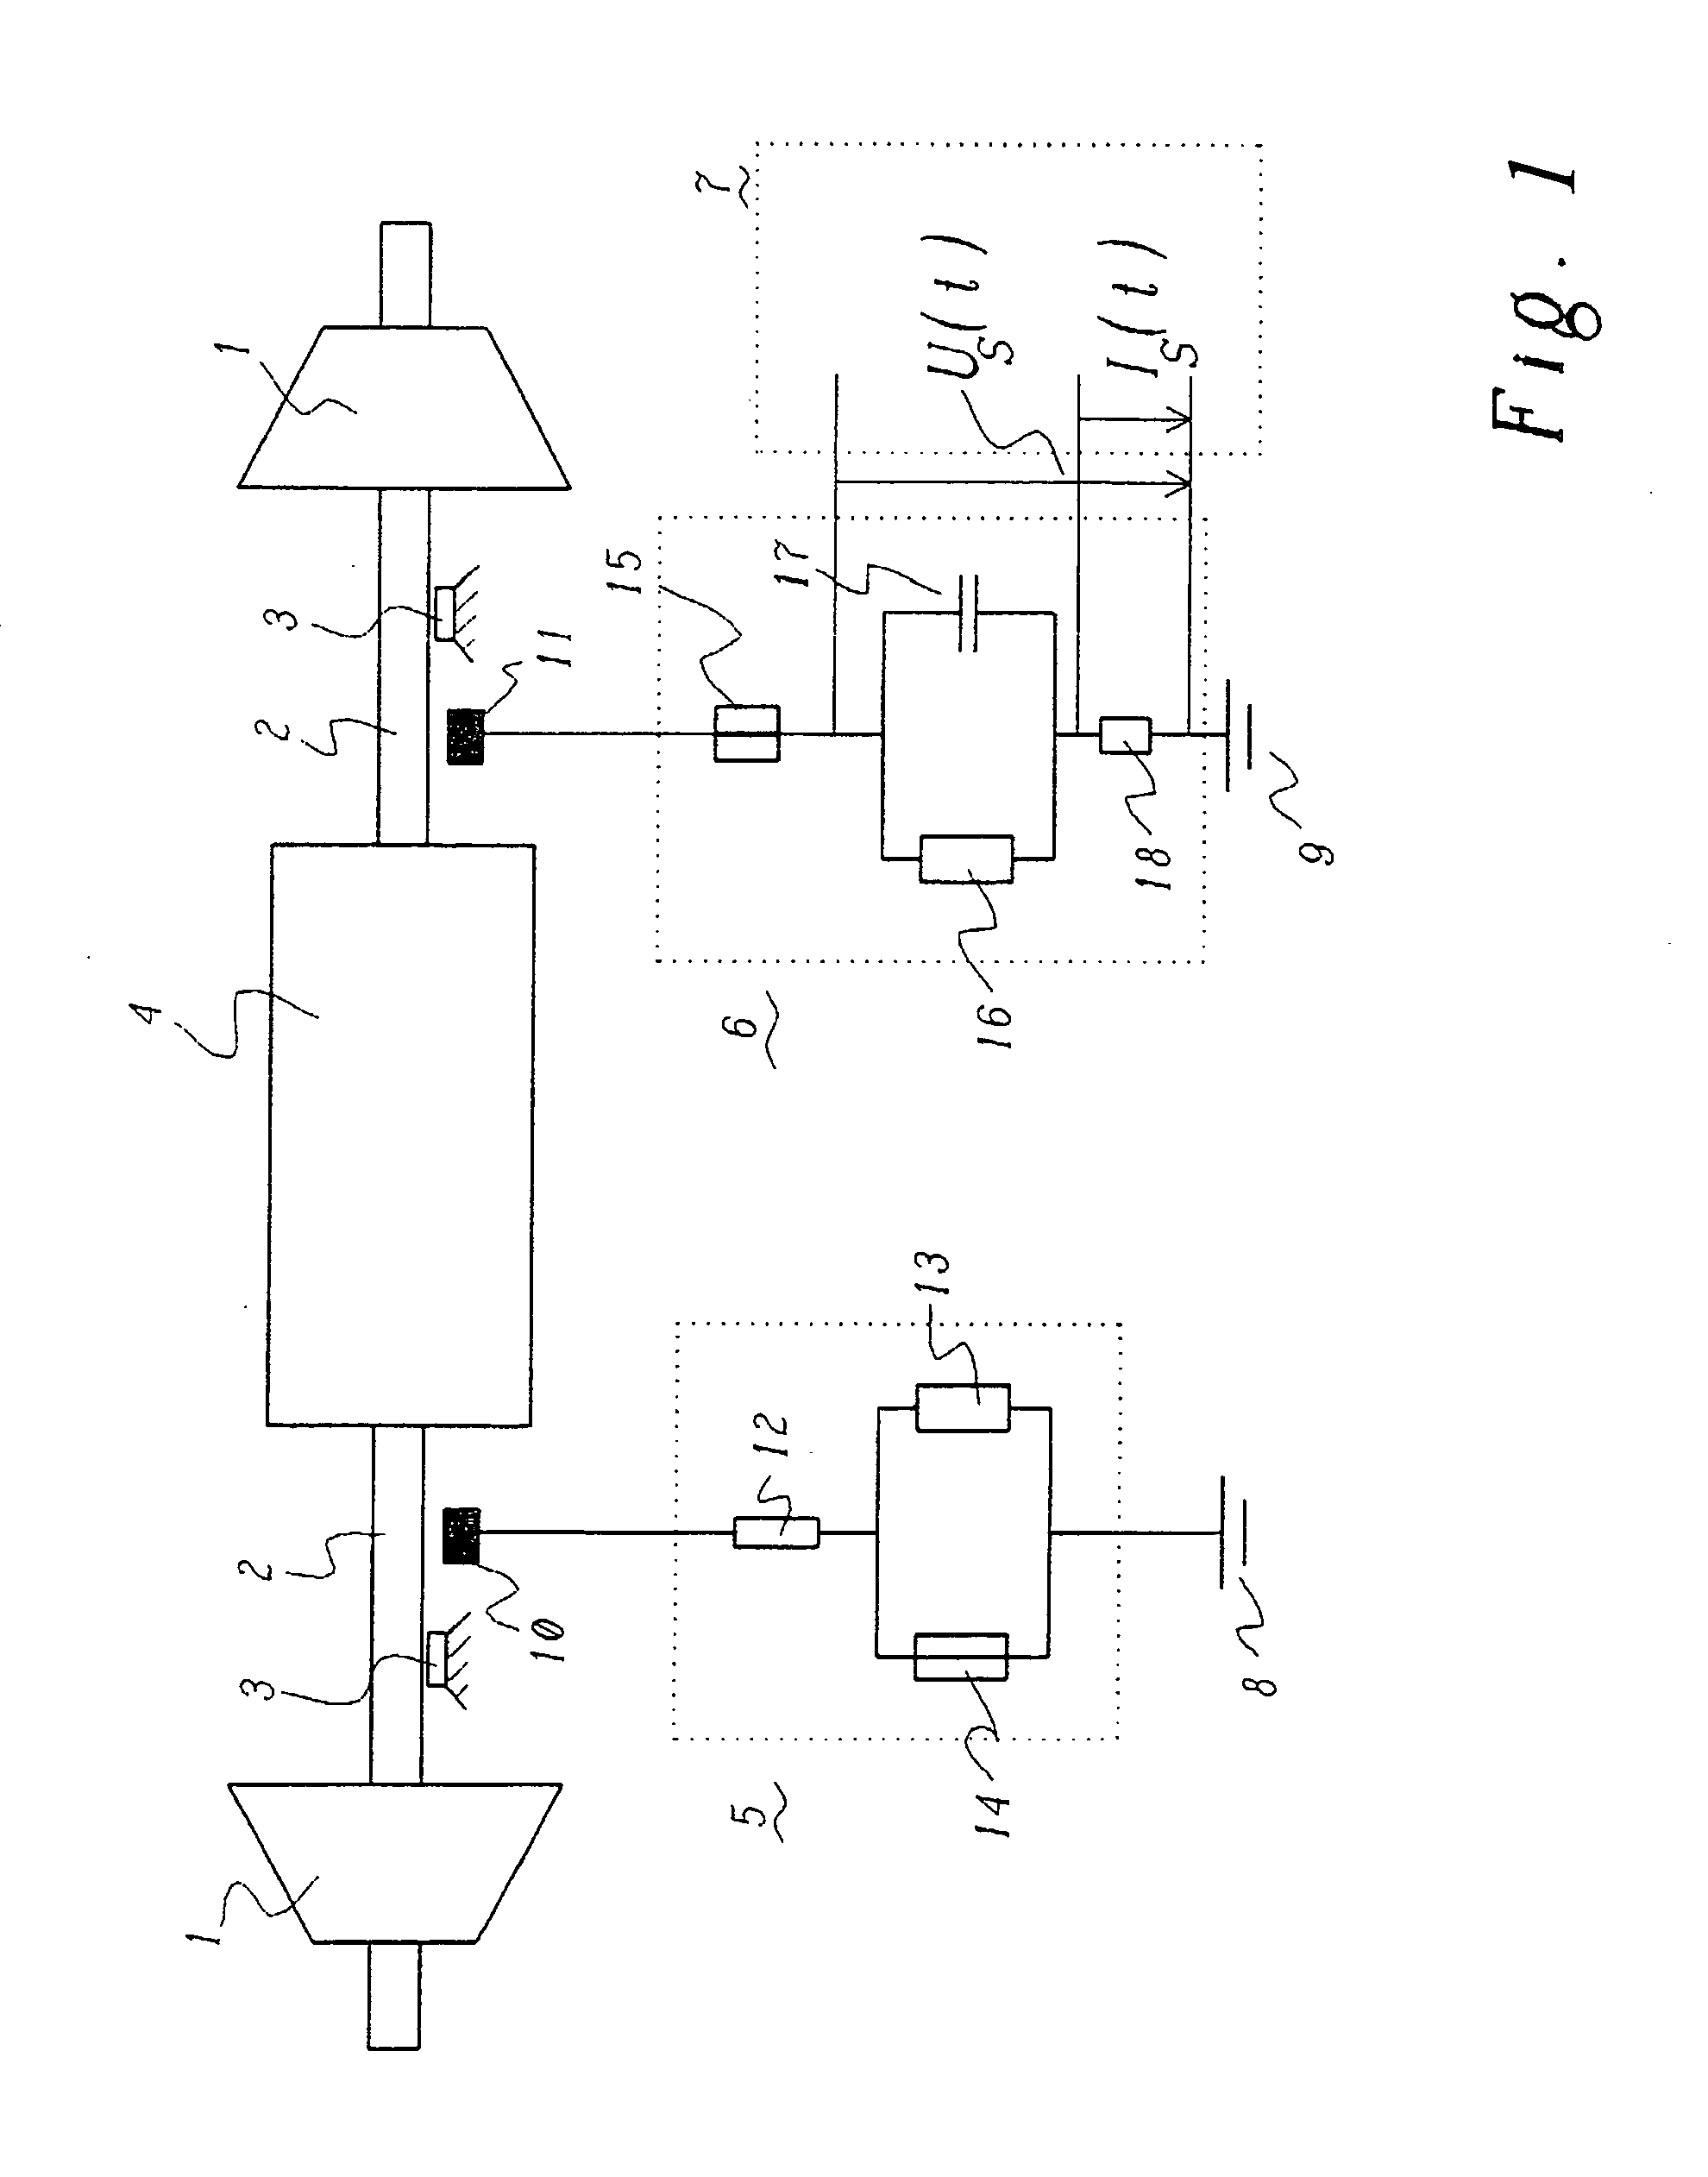 Apparatus and method for detecting vibrations of the shaft assembly in an electrical machine